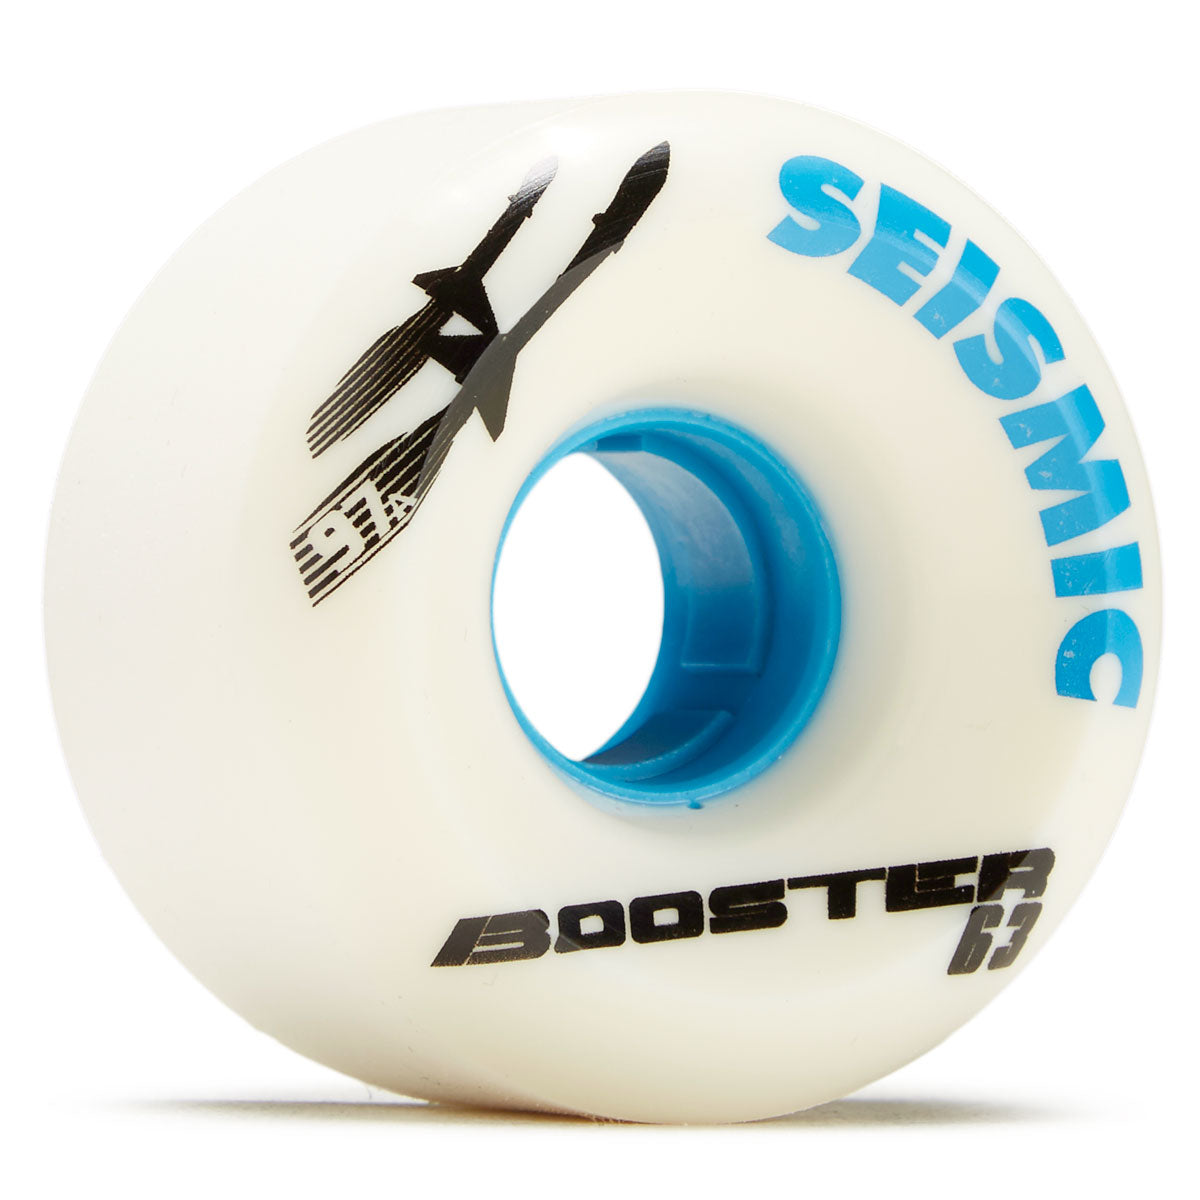 Seismic Booster 97a Longboard Wheels - White - 63mm image 1